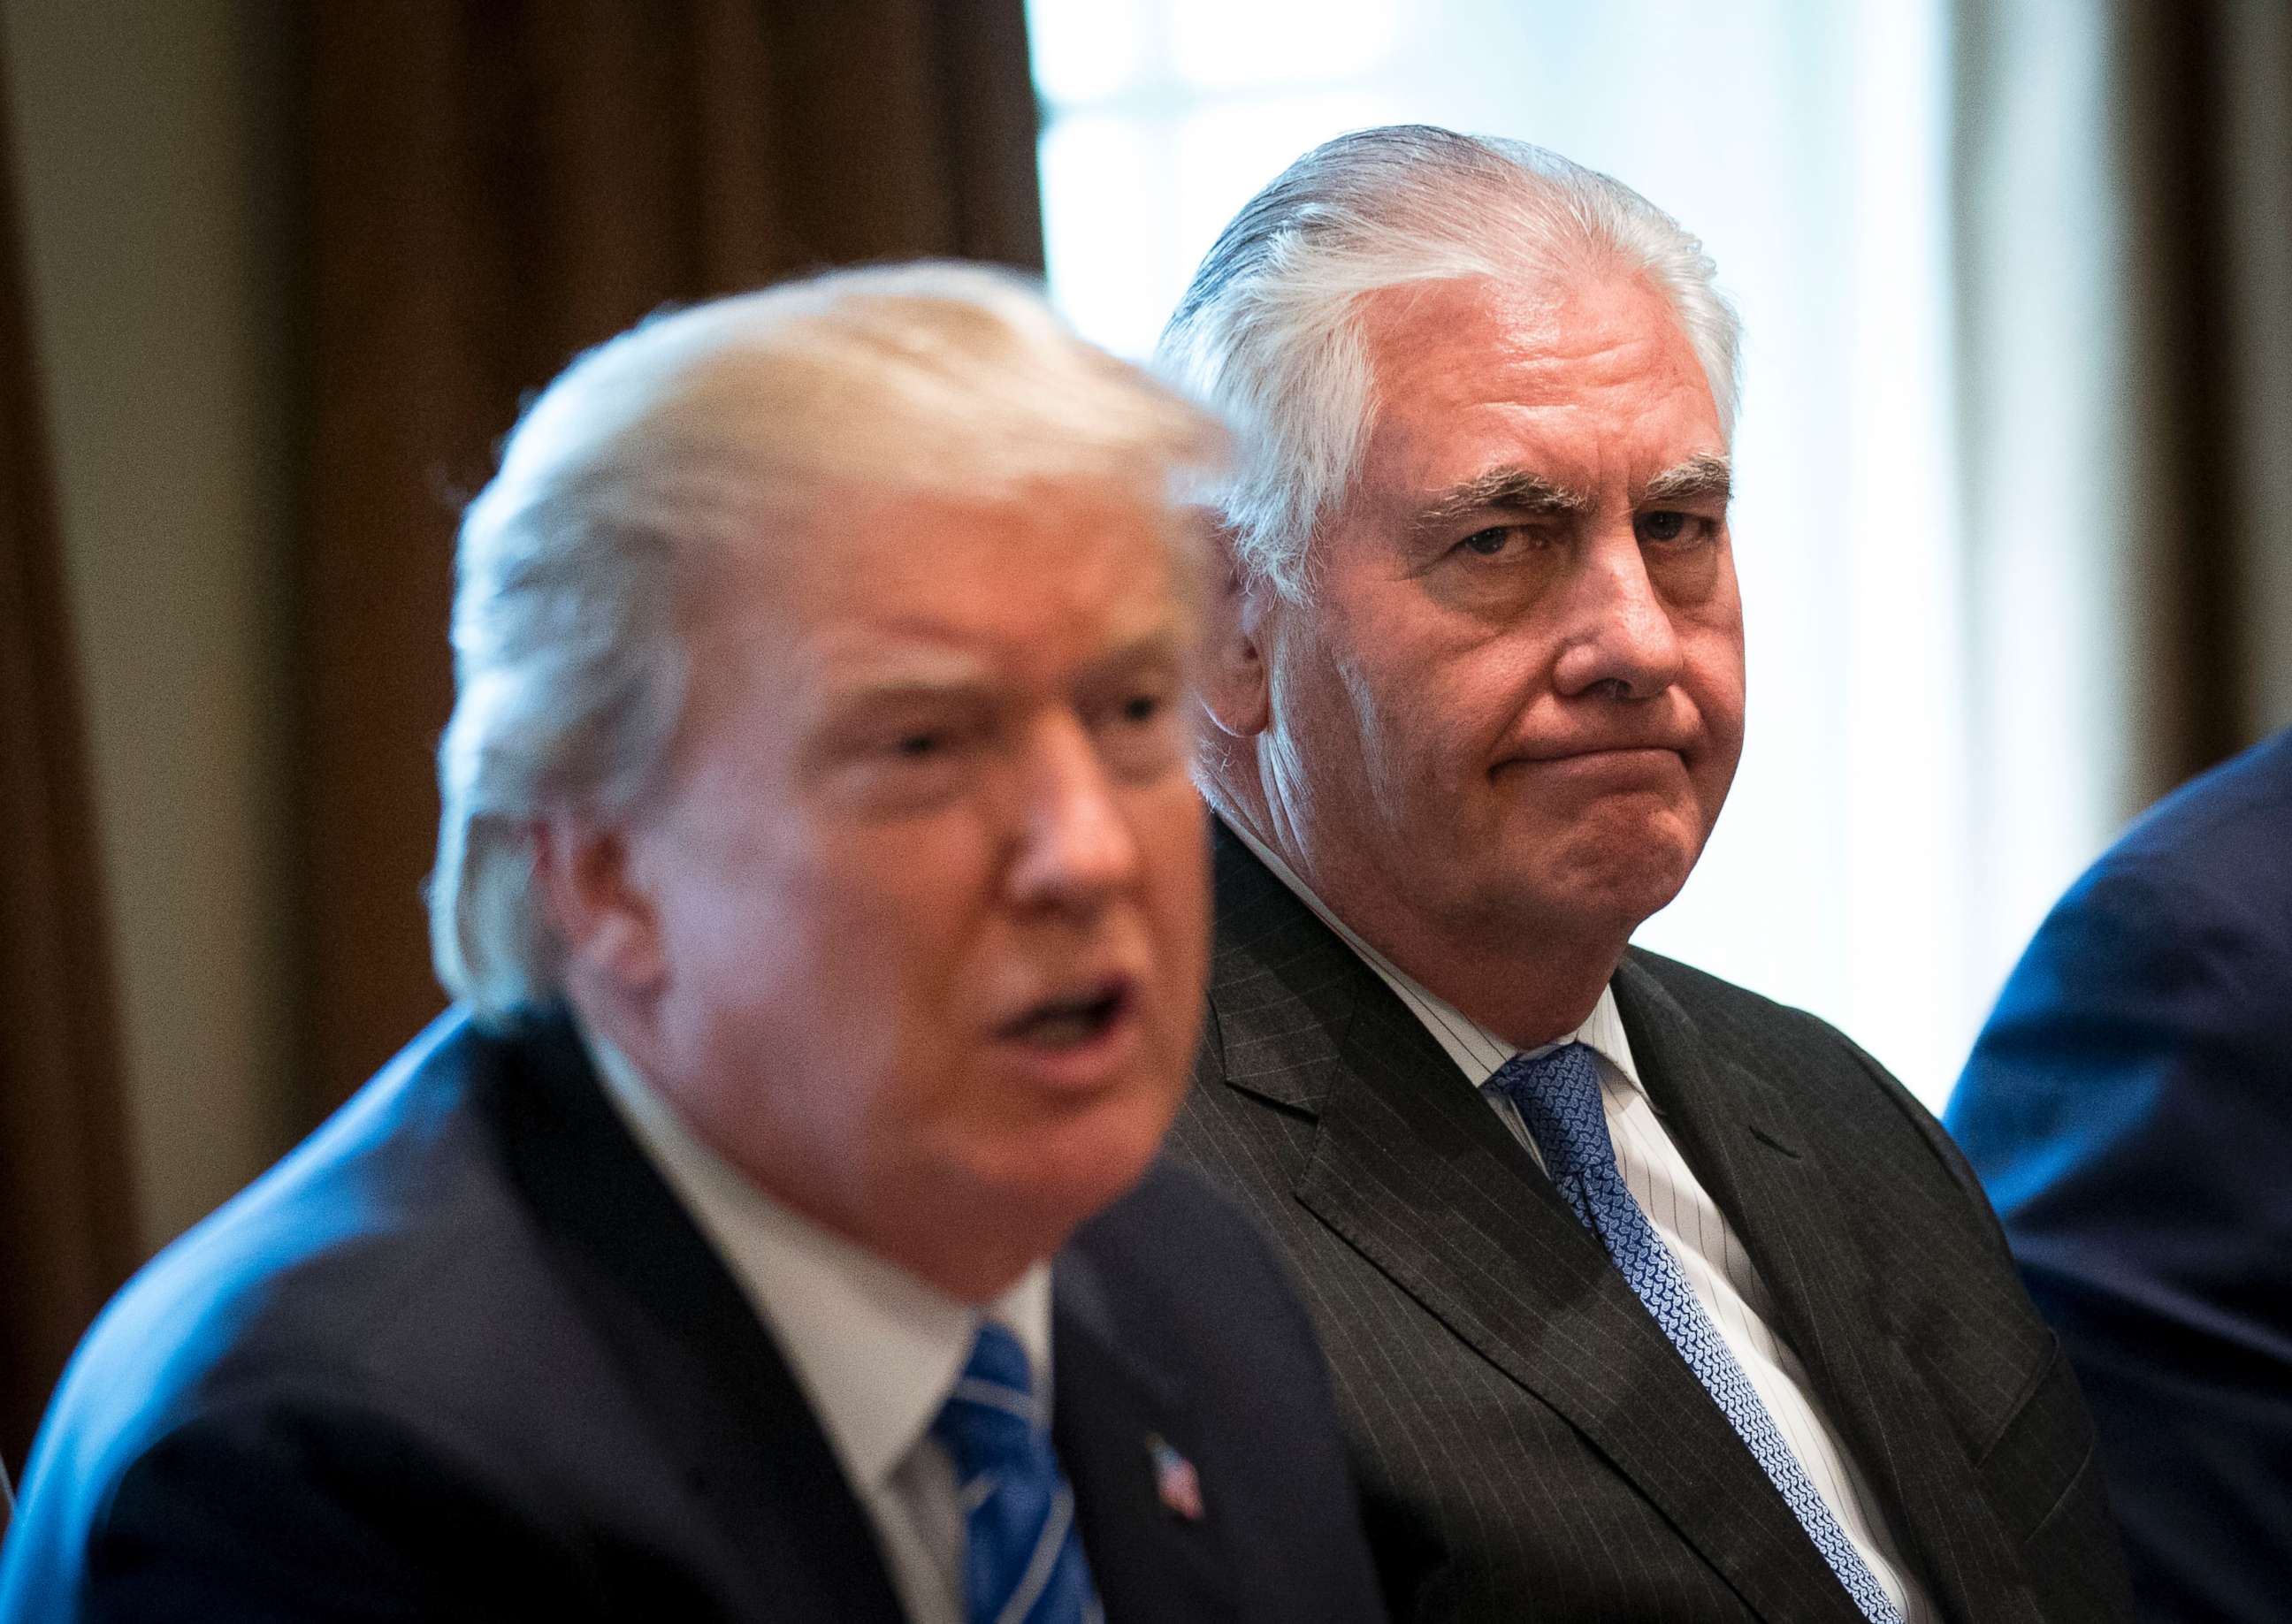 PHOTO: Secretary of State Rex Tillerson listens as President Donald Trump speaks during a meeting in the Cabinet Room of the White House in Washington, Sept. 12, 2017.